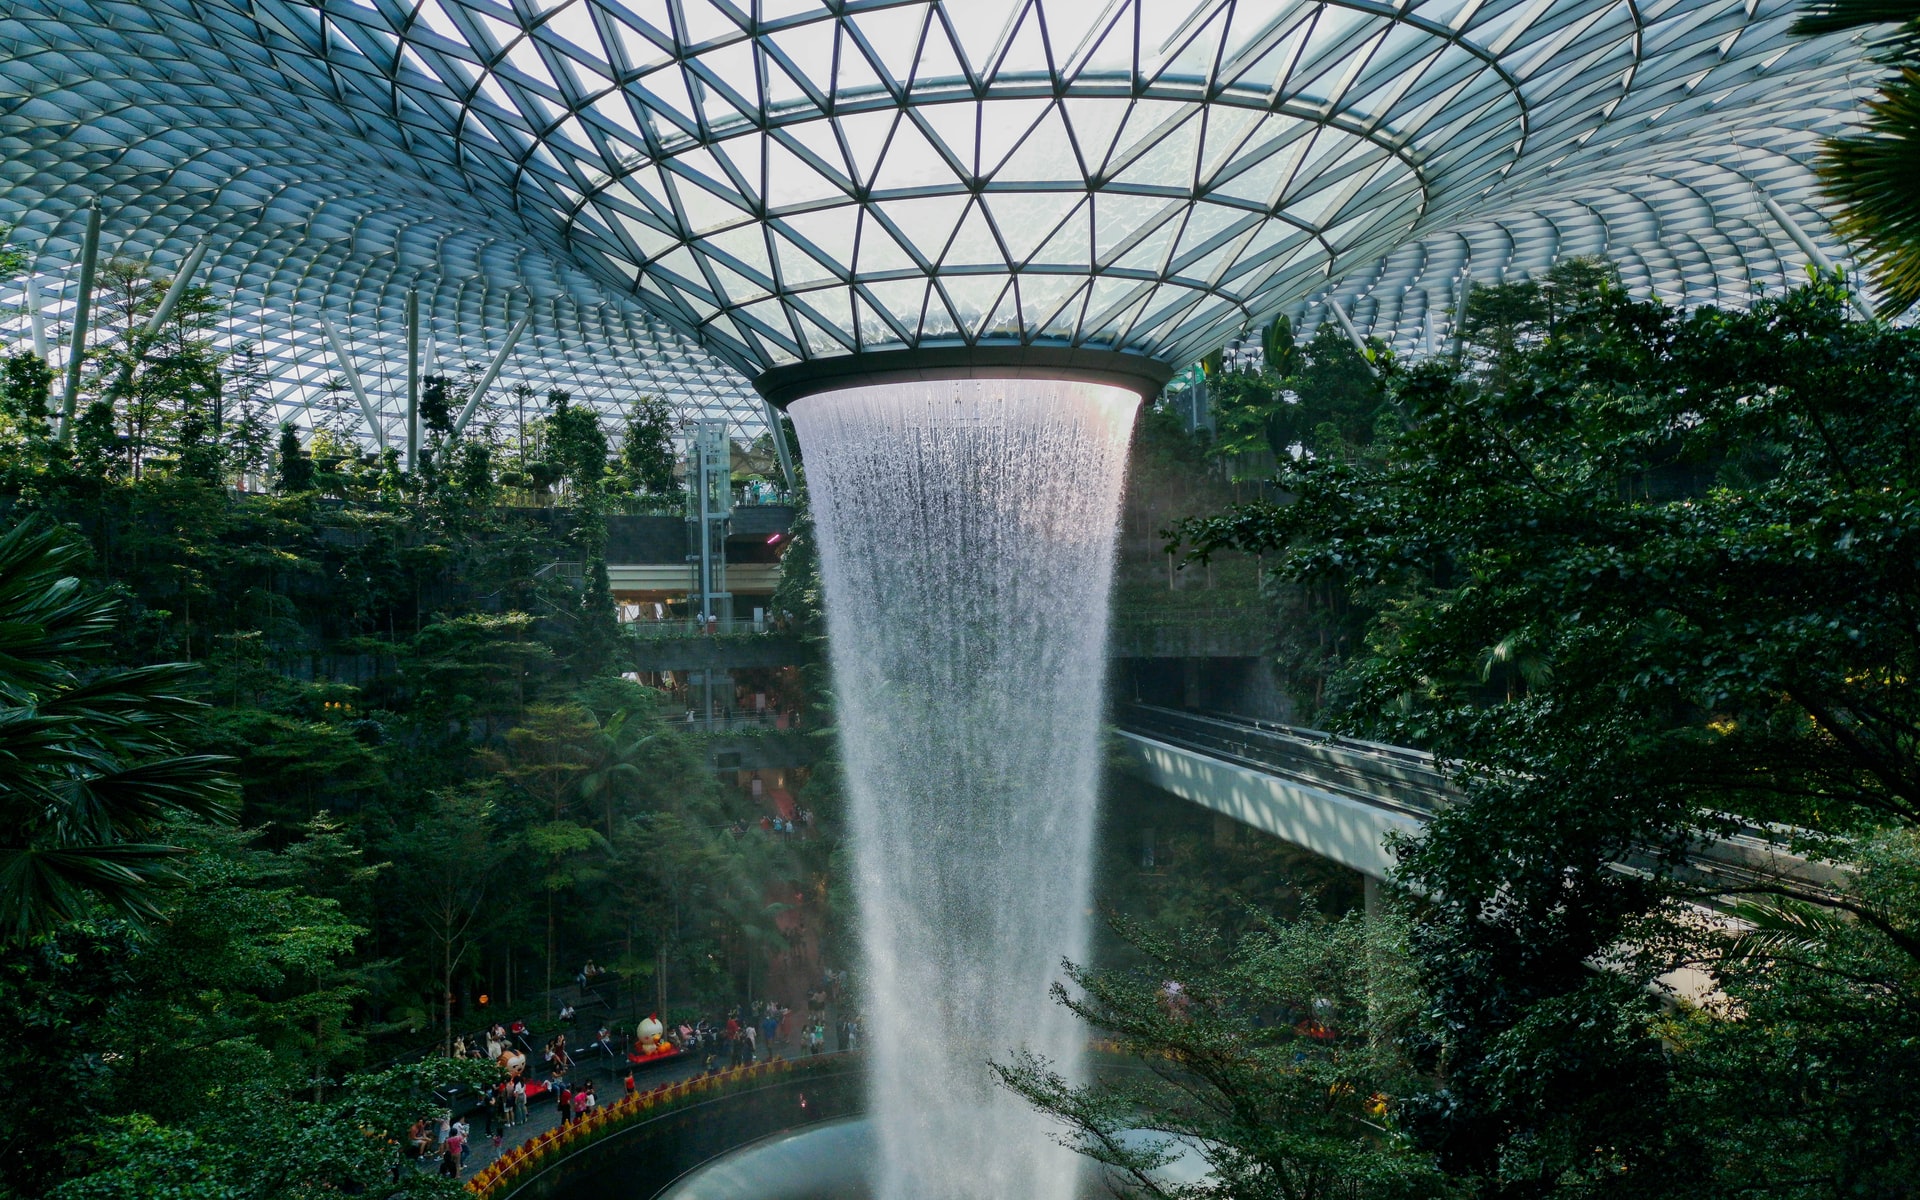 Things to do at Jewel Changi and Jewel Changi attractions